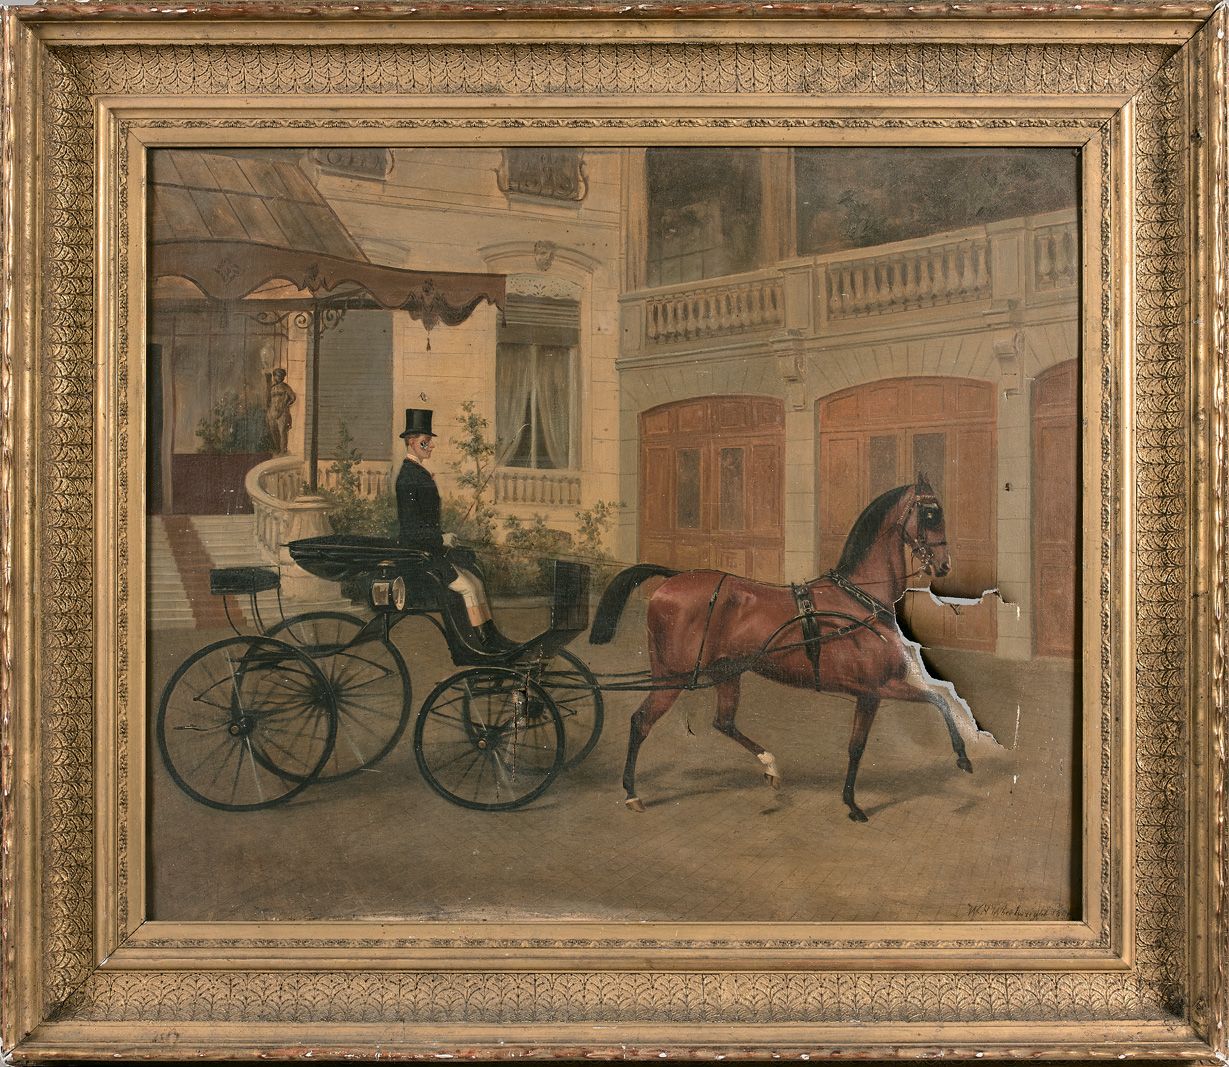 Null William Henry WHEELWRIGHT (act. 1857-1897)

The Departure of the Phaeton fo&hellip;